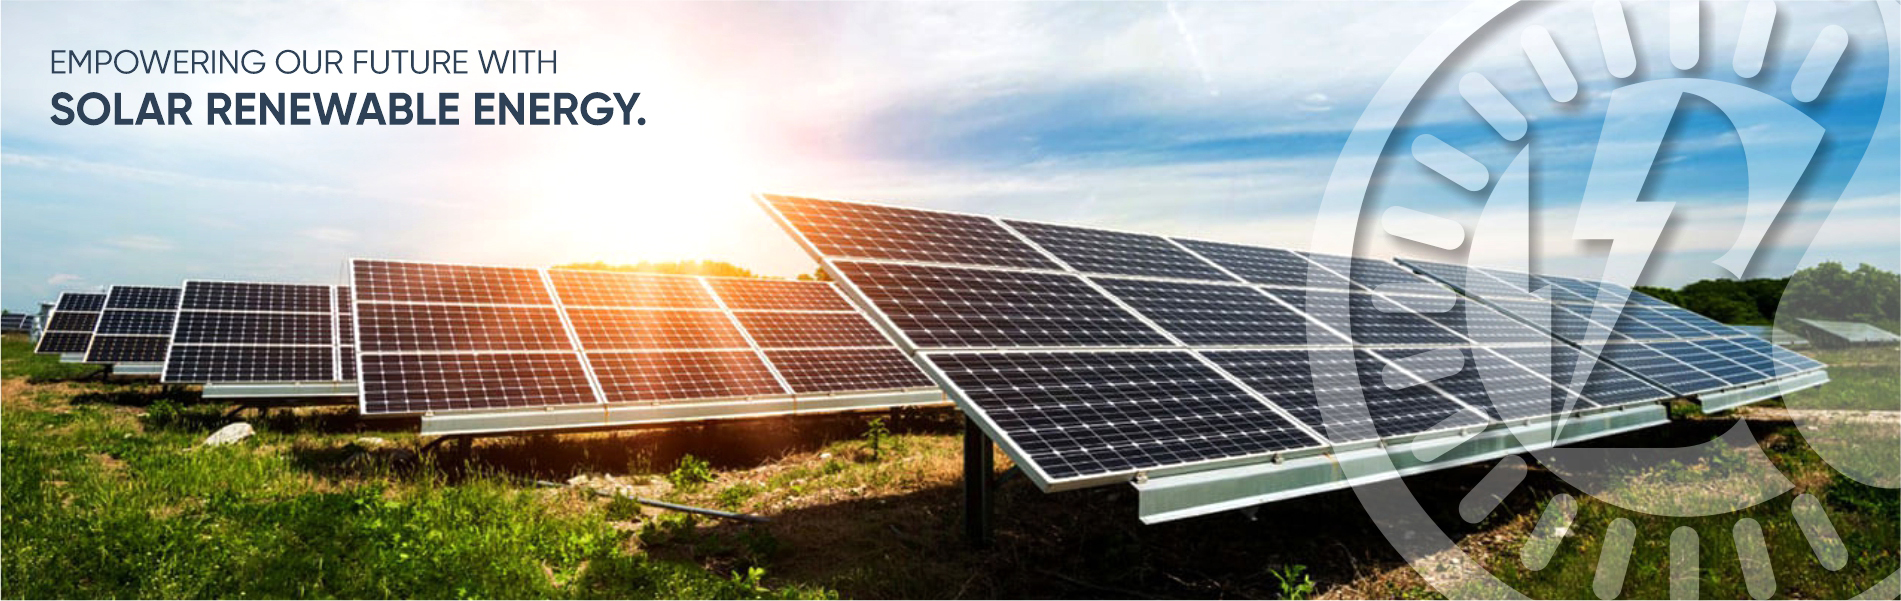 What are The Perks
                            of Transitioning to Solar Energy?